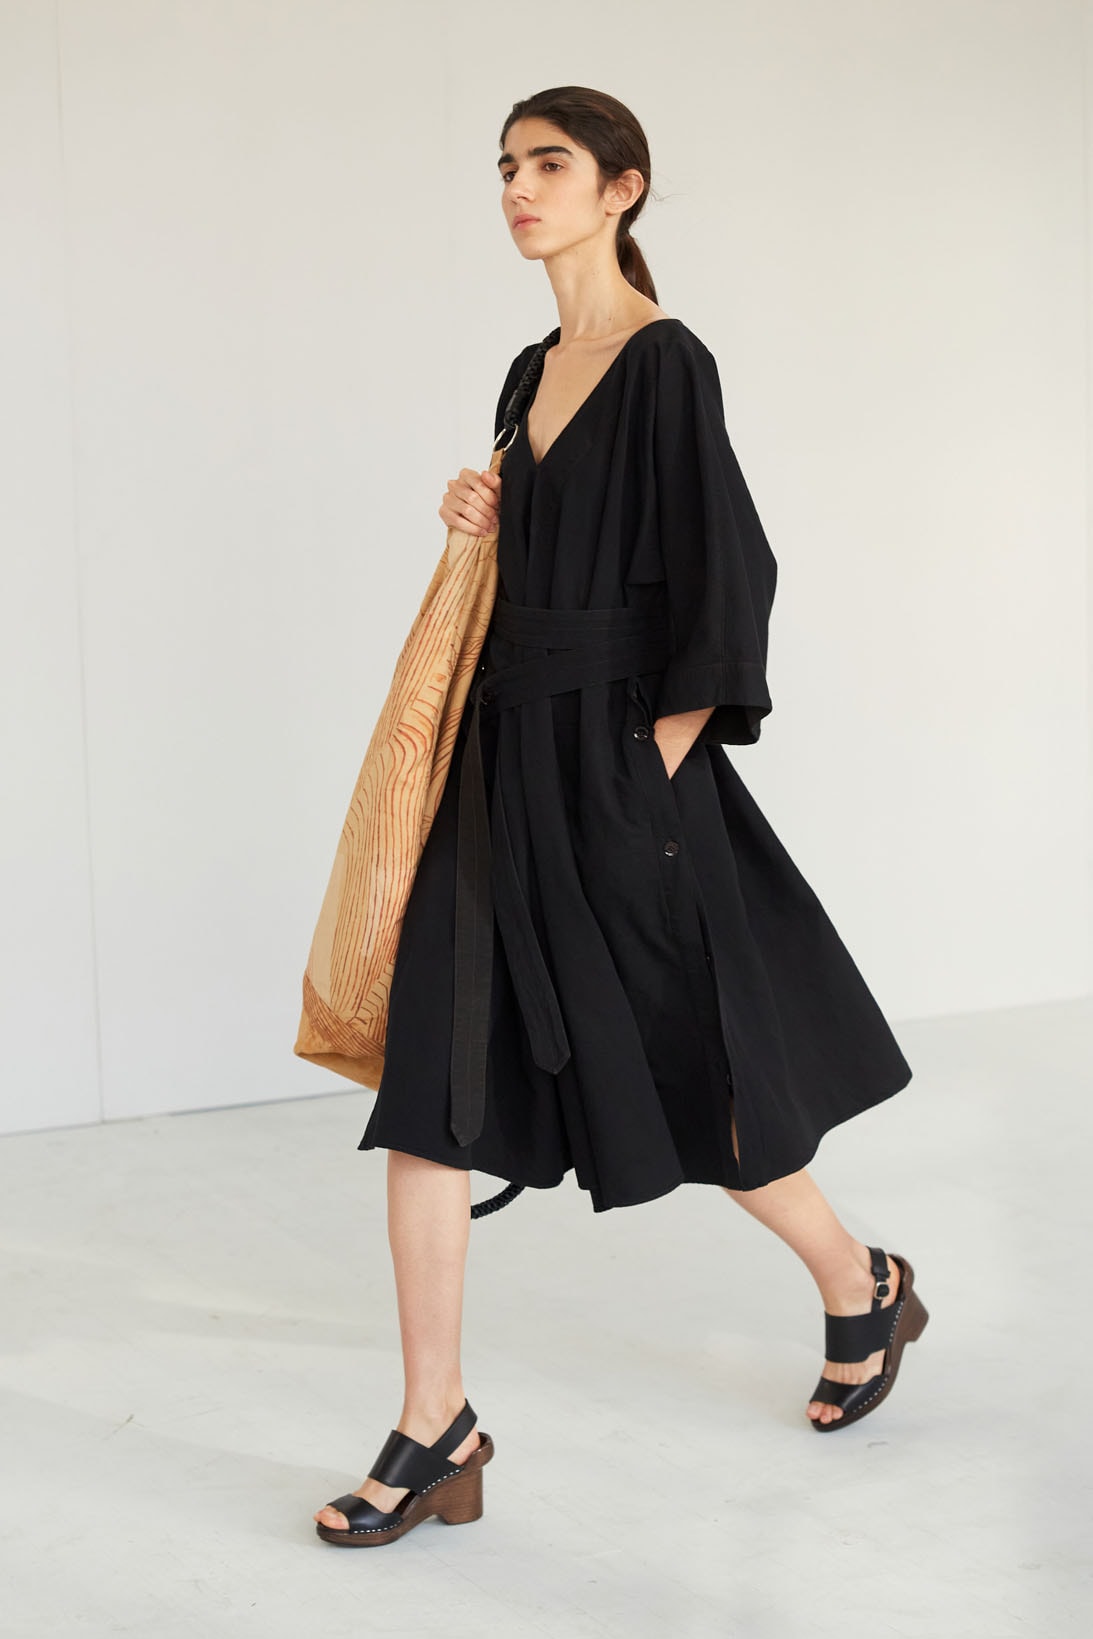 lemaire spring summer 2021 menswear collection co-ed runway announcement christophe sarah linh tran